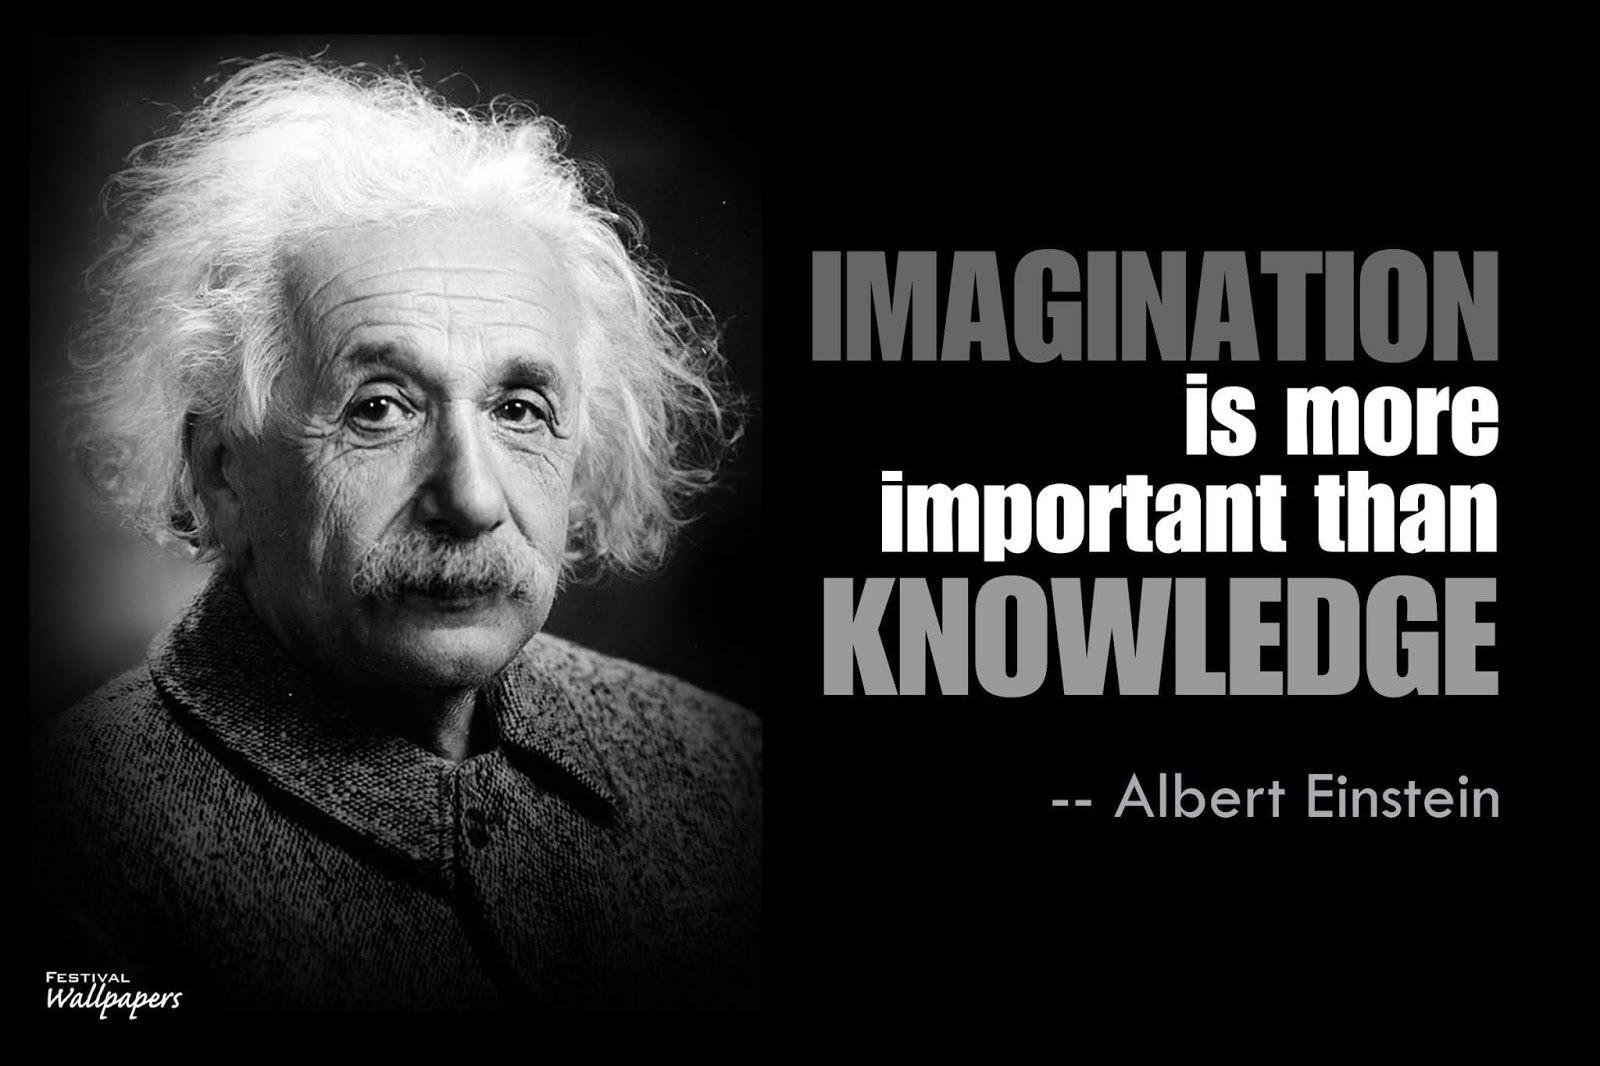 Einstein Quotes Wallpapers Top Free Einstein Quotes Backgrounds